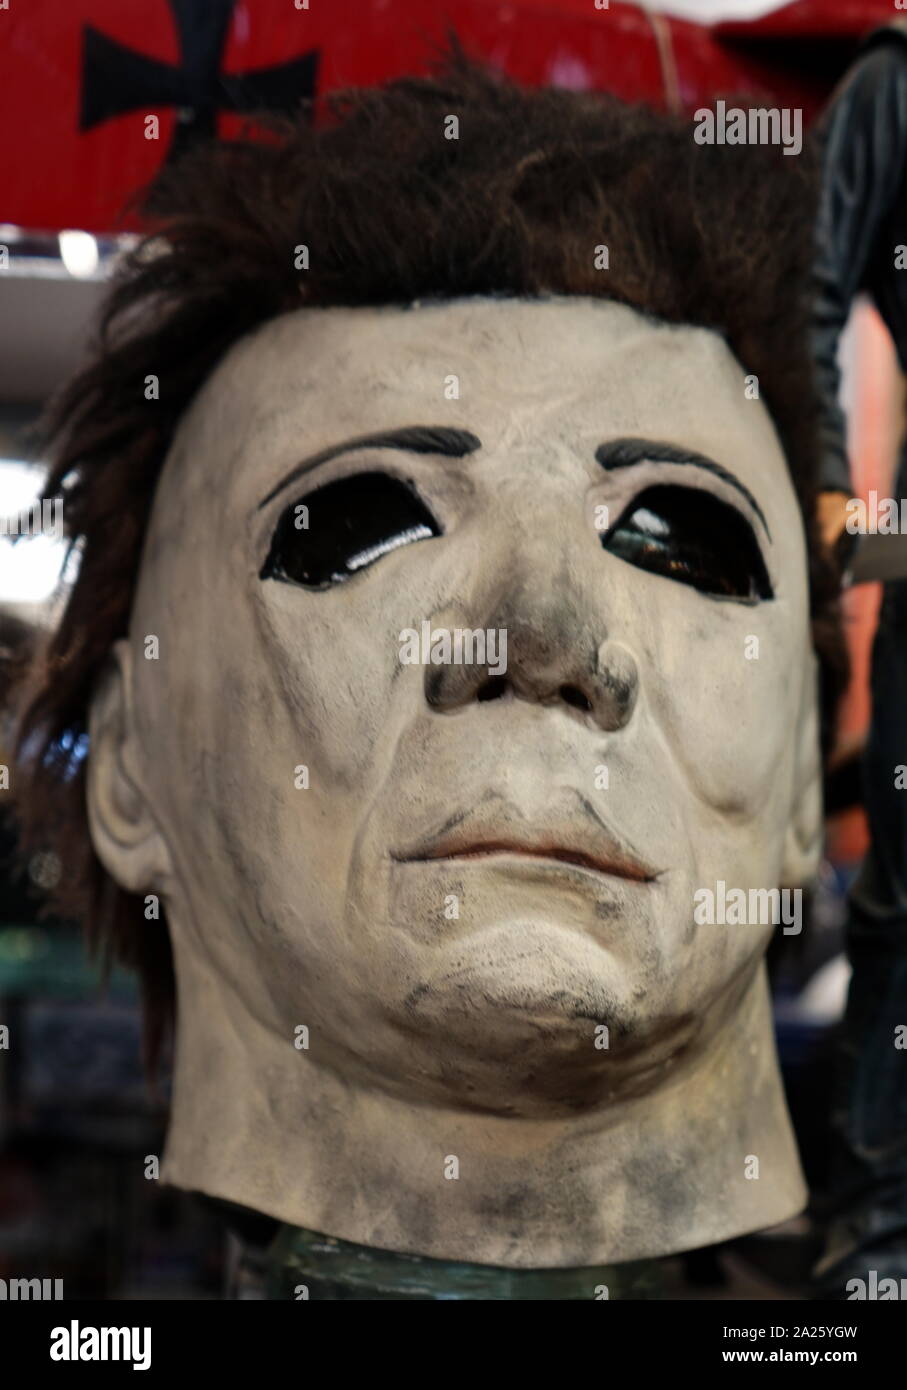 One of the masks used in the Halloween horror films. Halloween (1978) was Jamie Lee Curtis' film debut. Jamie Lee Haden-Gues, Baroness Haden-Gues (1958-) an American actress, author, and activist. Stock Photo